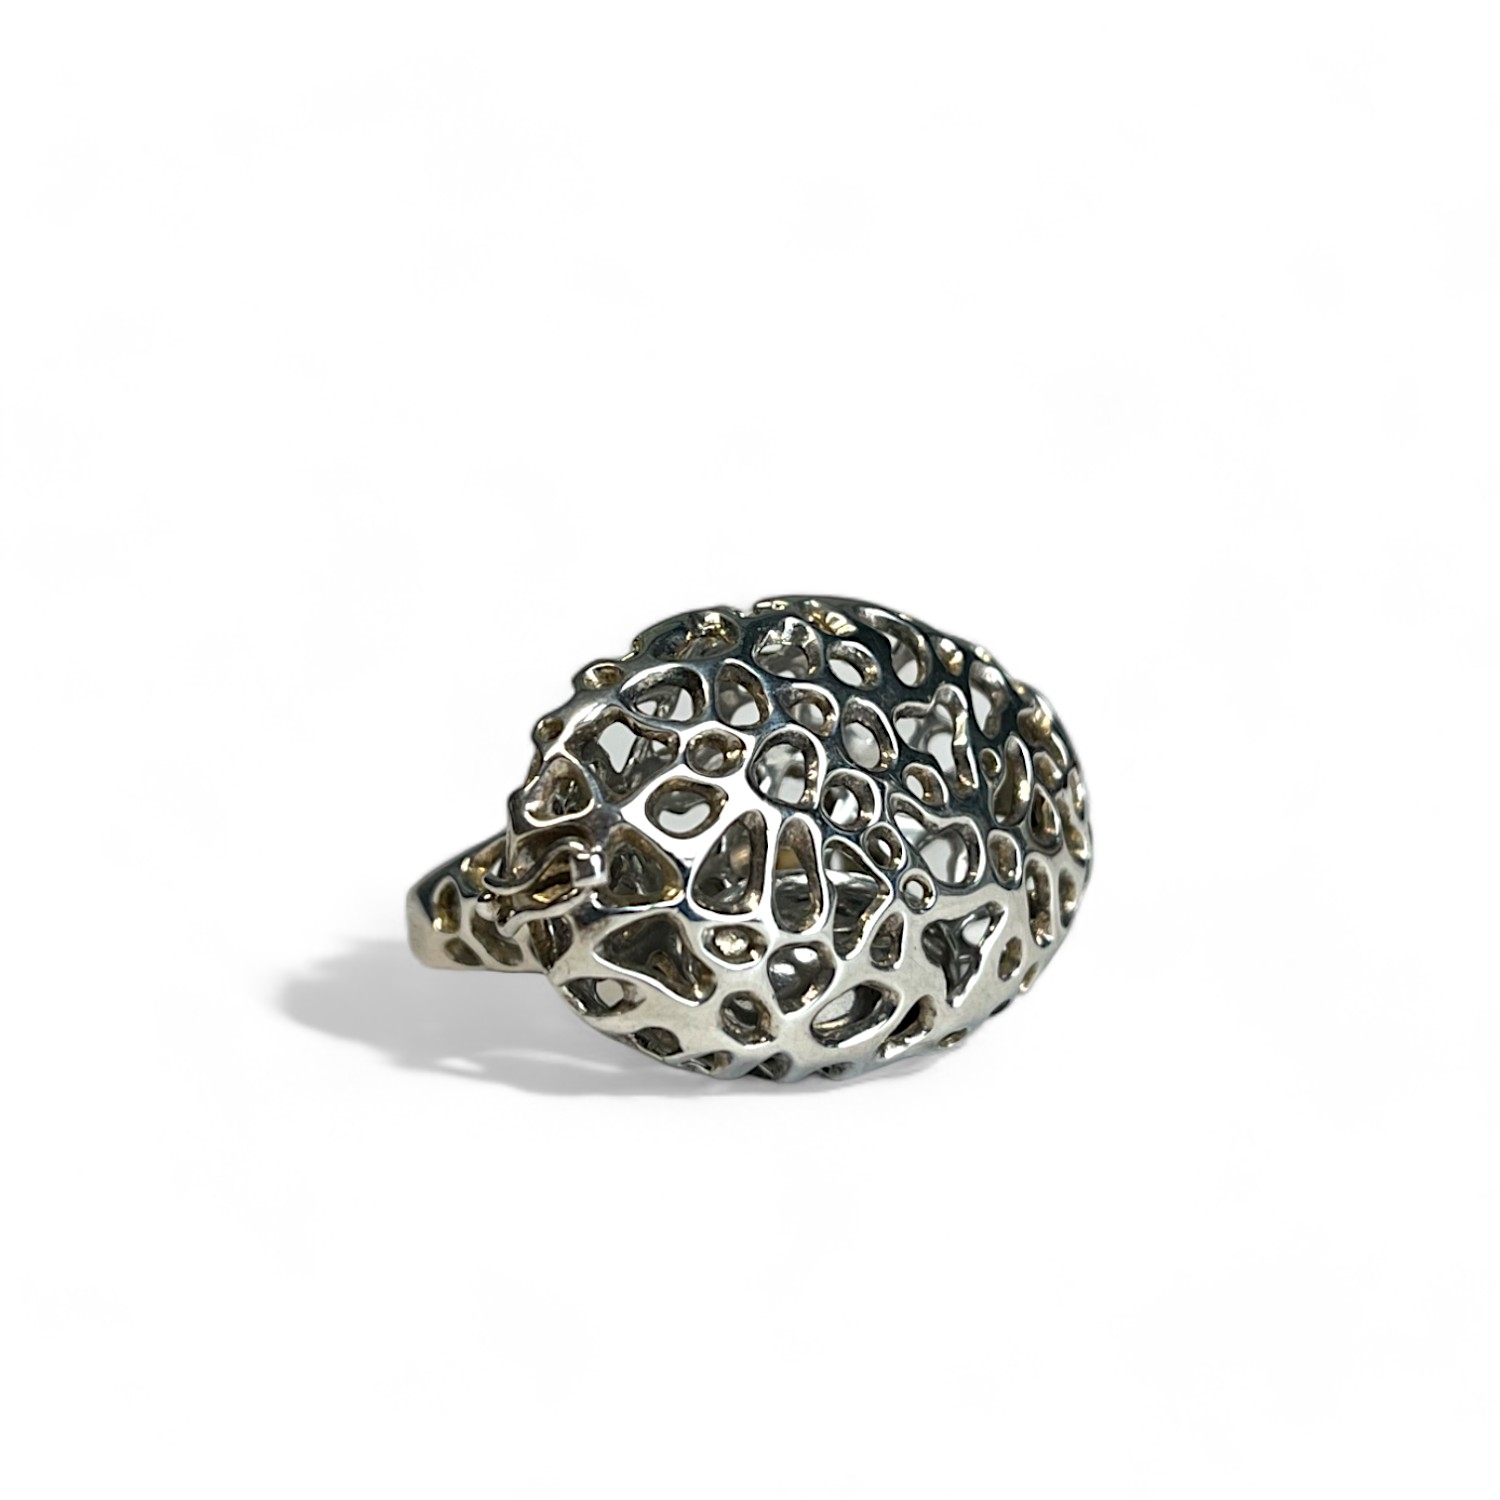 A large Rachel galley sterling silver pebble charmed ring. Large pierced setting, with hinged top co